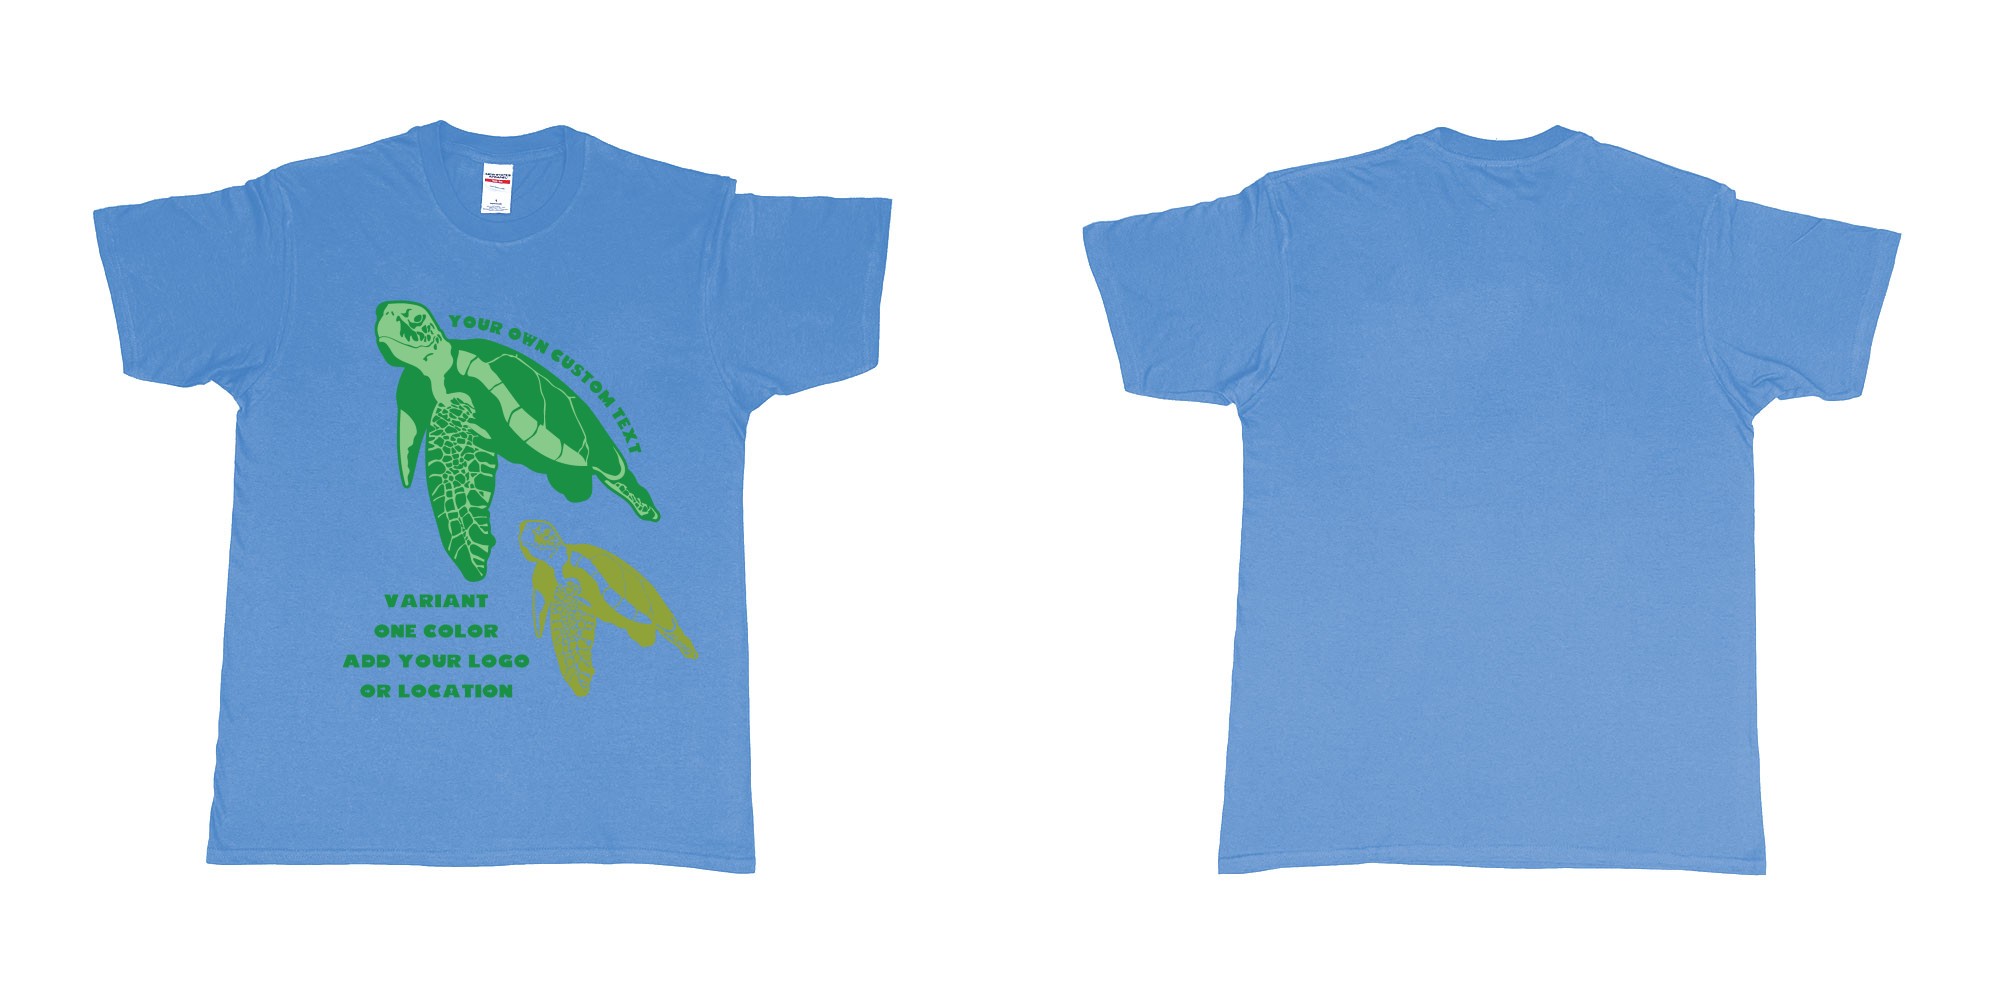 Custom tshirt design hawksbill green sea turtle chilling add logo in fabric color carolina-blue choice your own text made in Bali by The Pirate Way